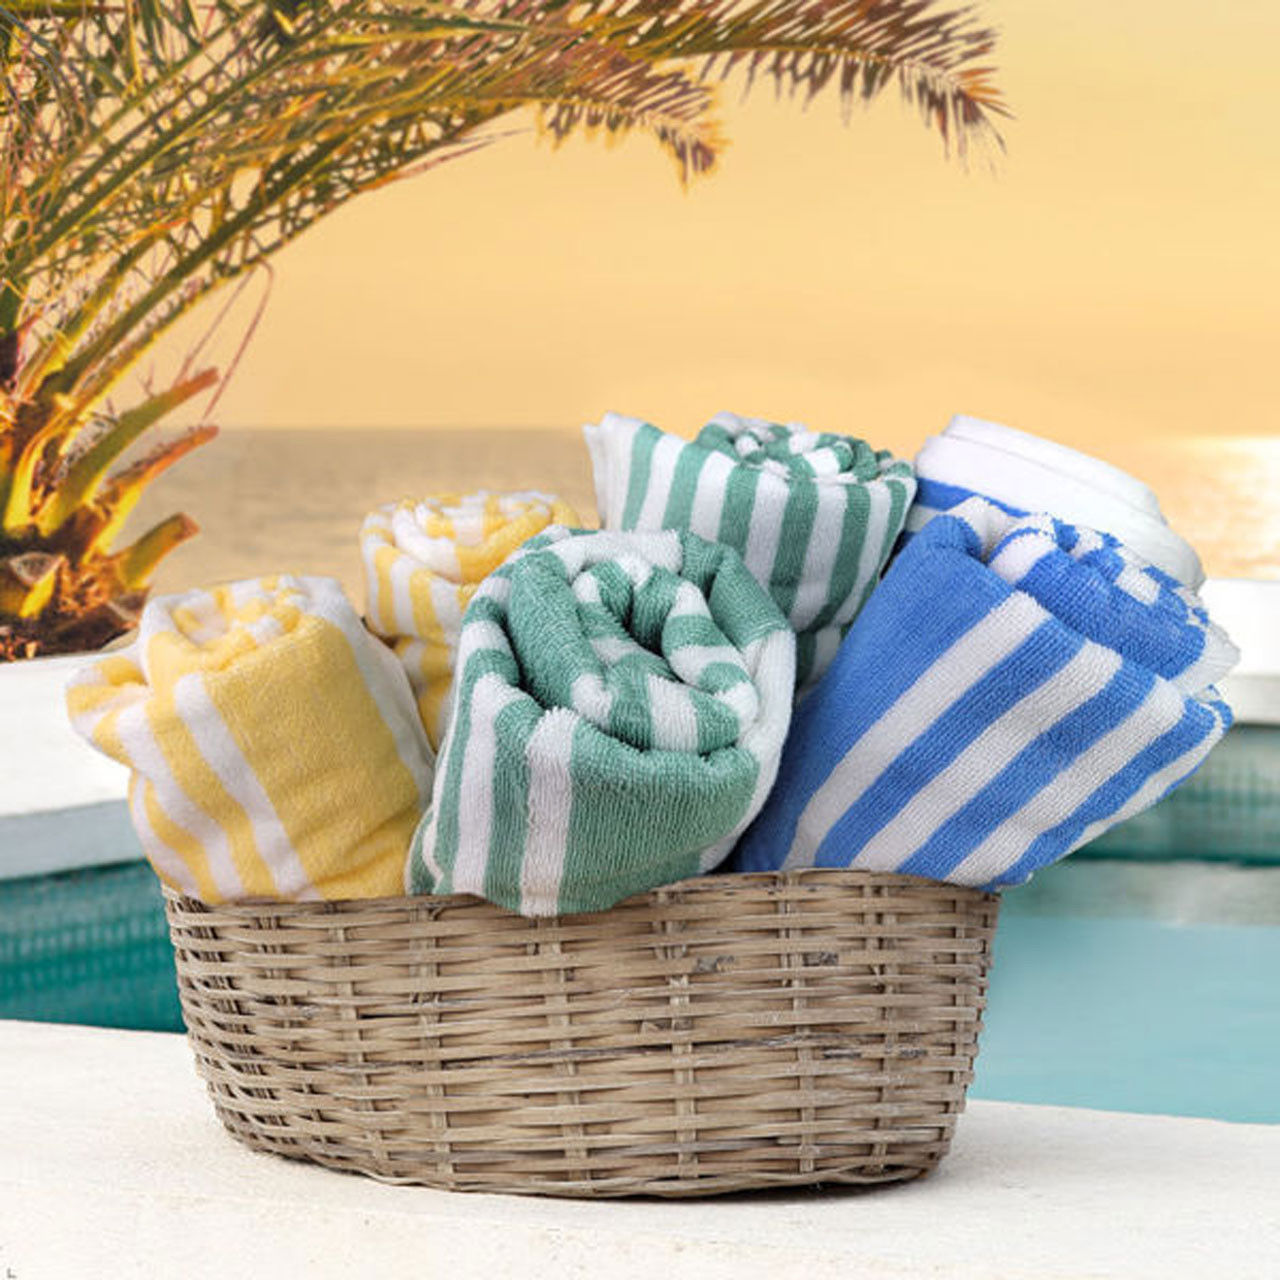 What materials are the Playa Cabana Stripe Bulk Beach Towels made of?